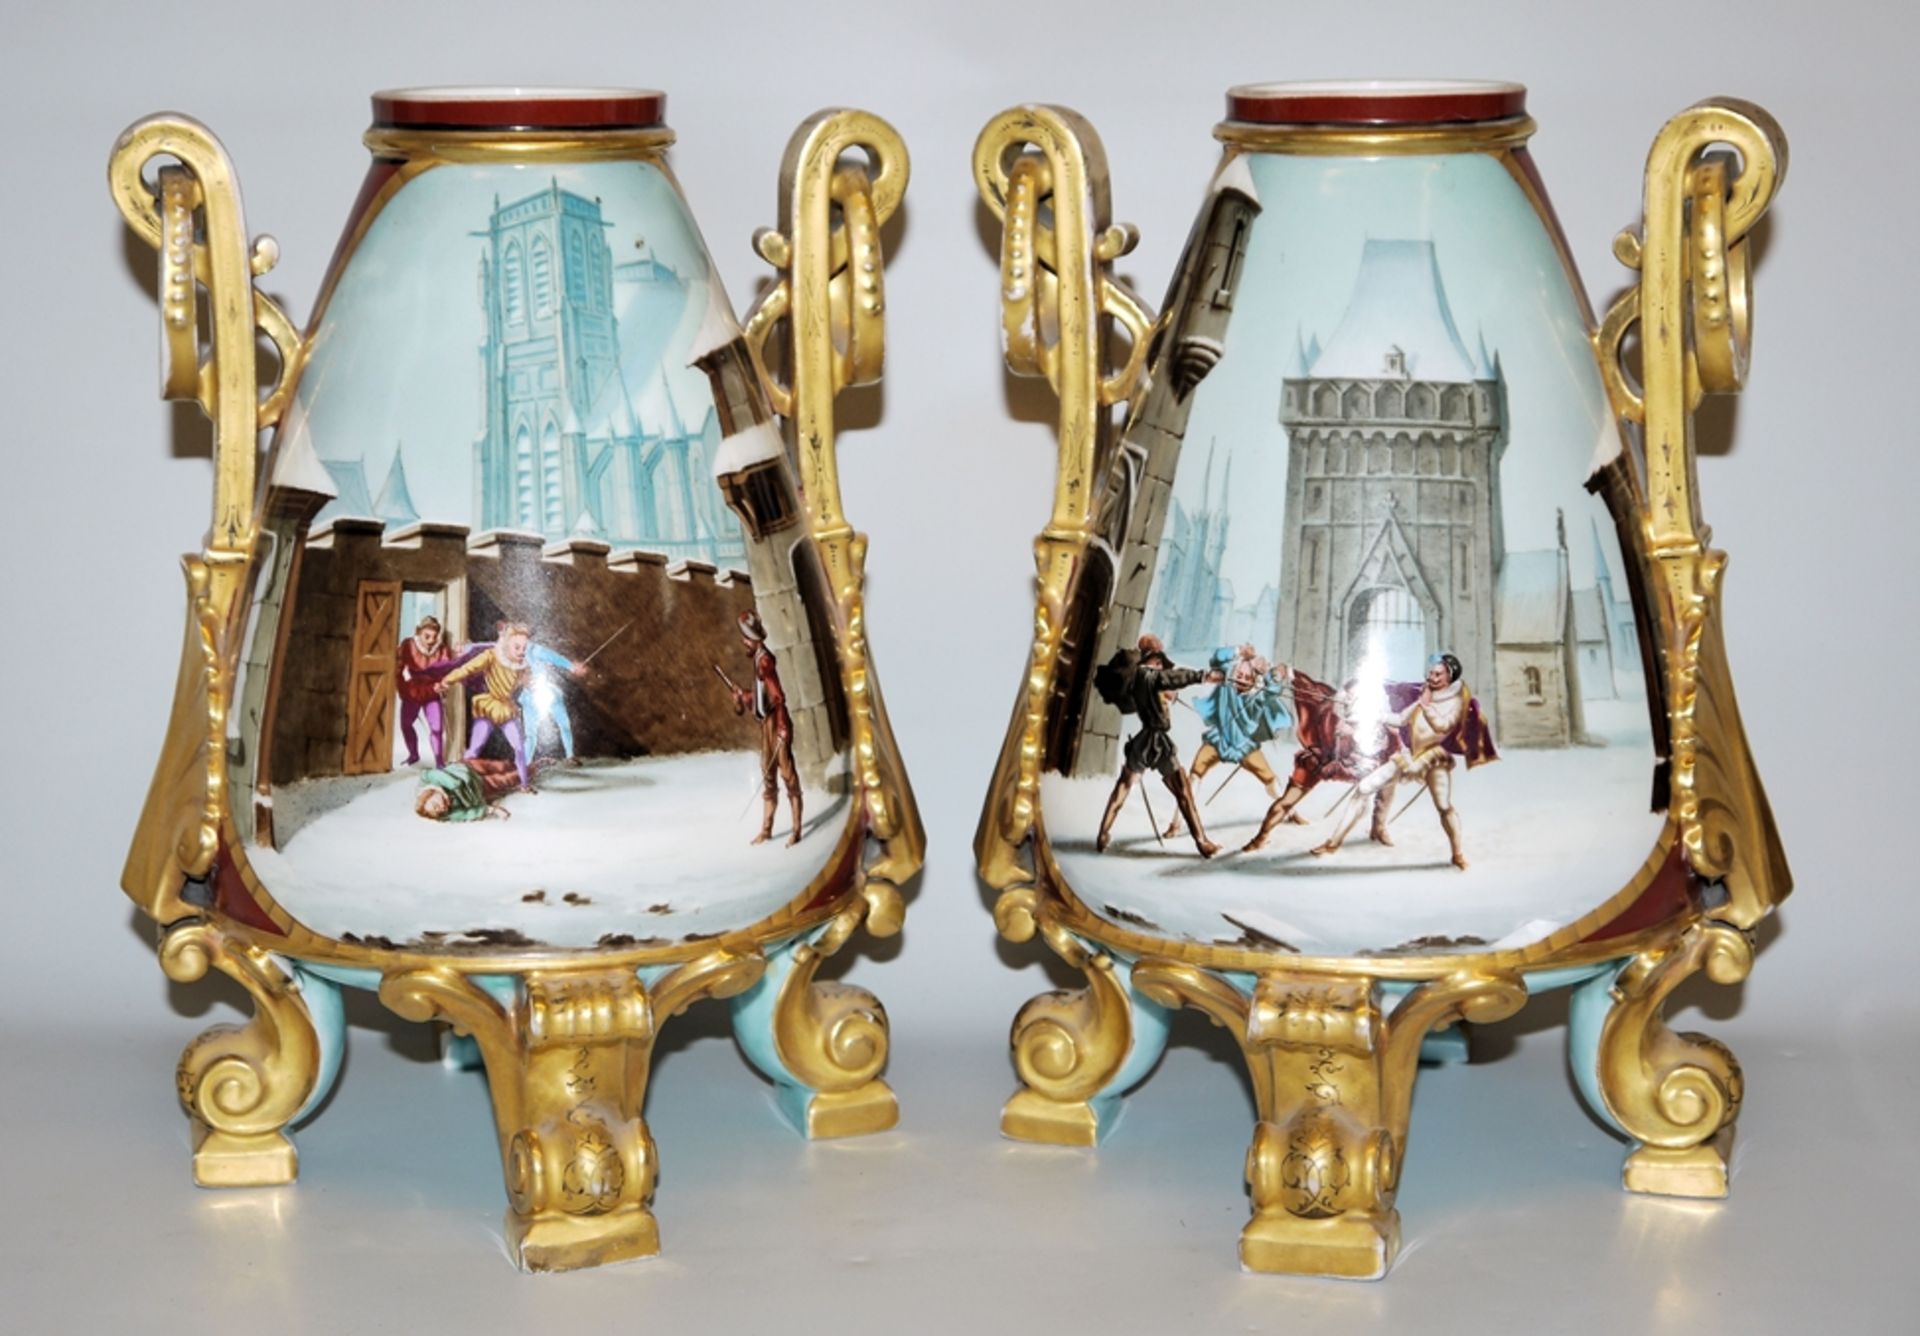 Pair of Historicist porcelain vases with battle scenes in front of Gothic architecture, France, 2nd